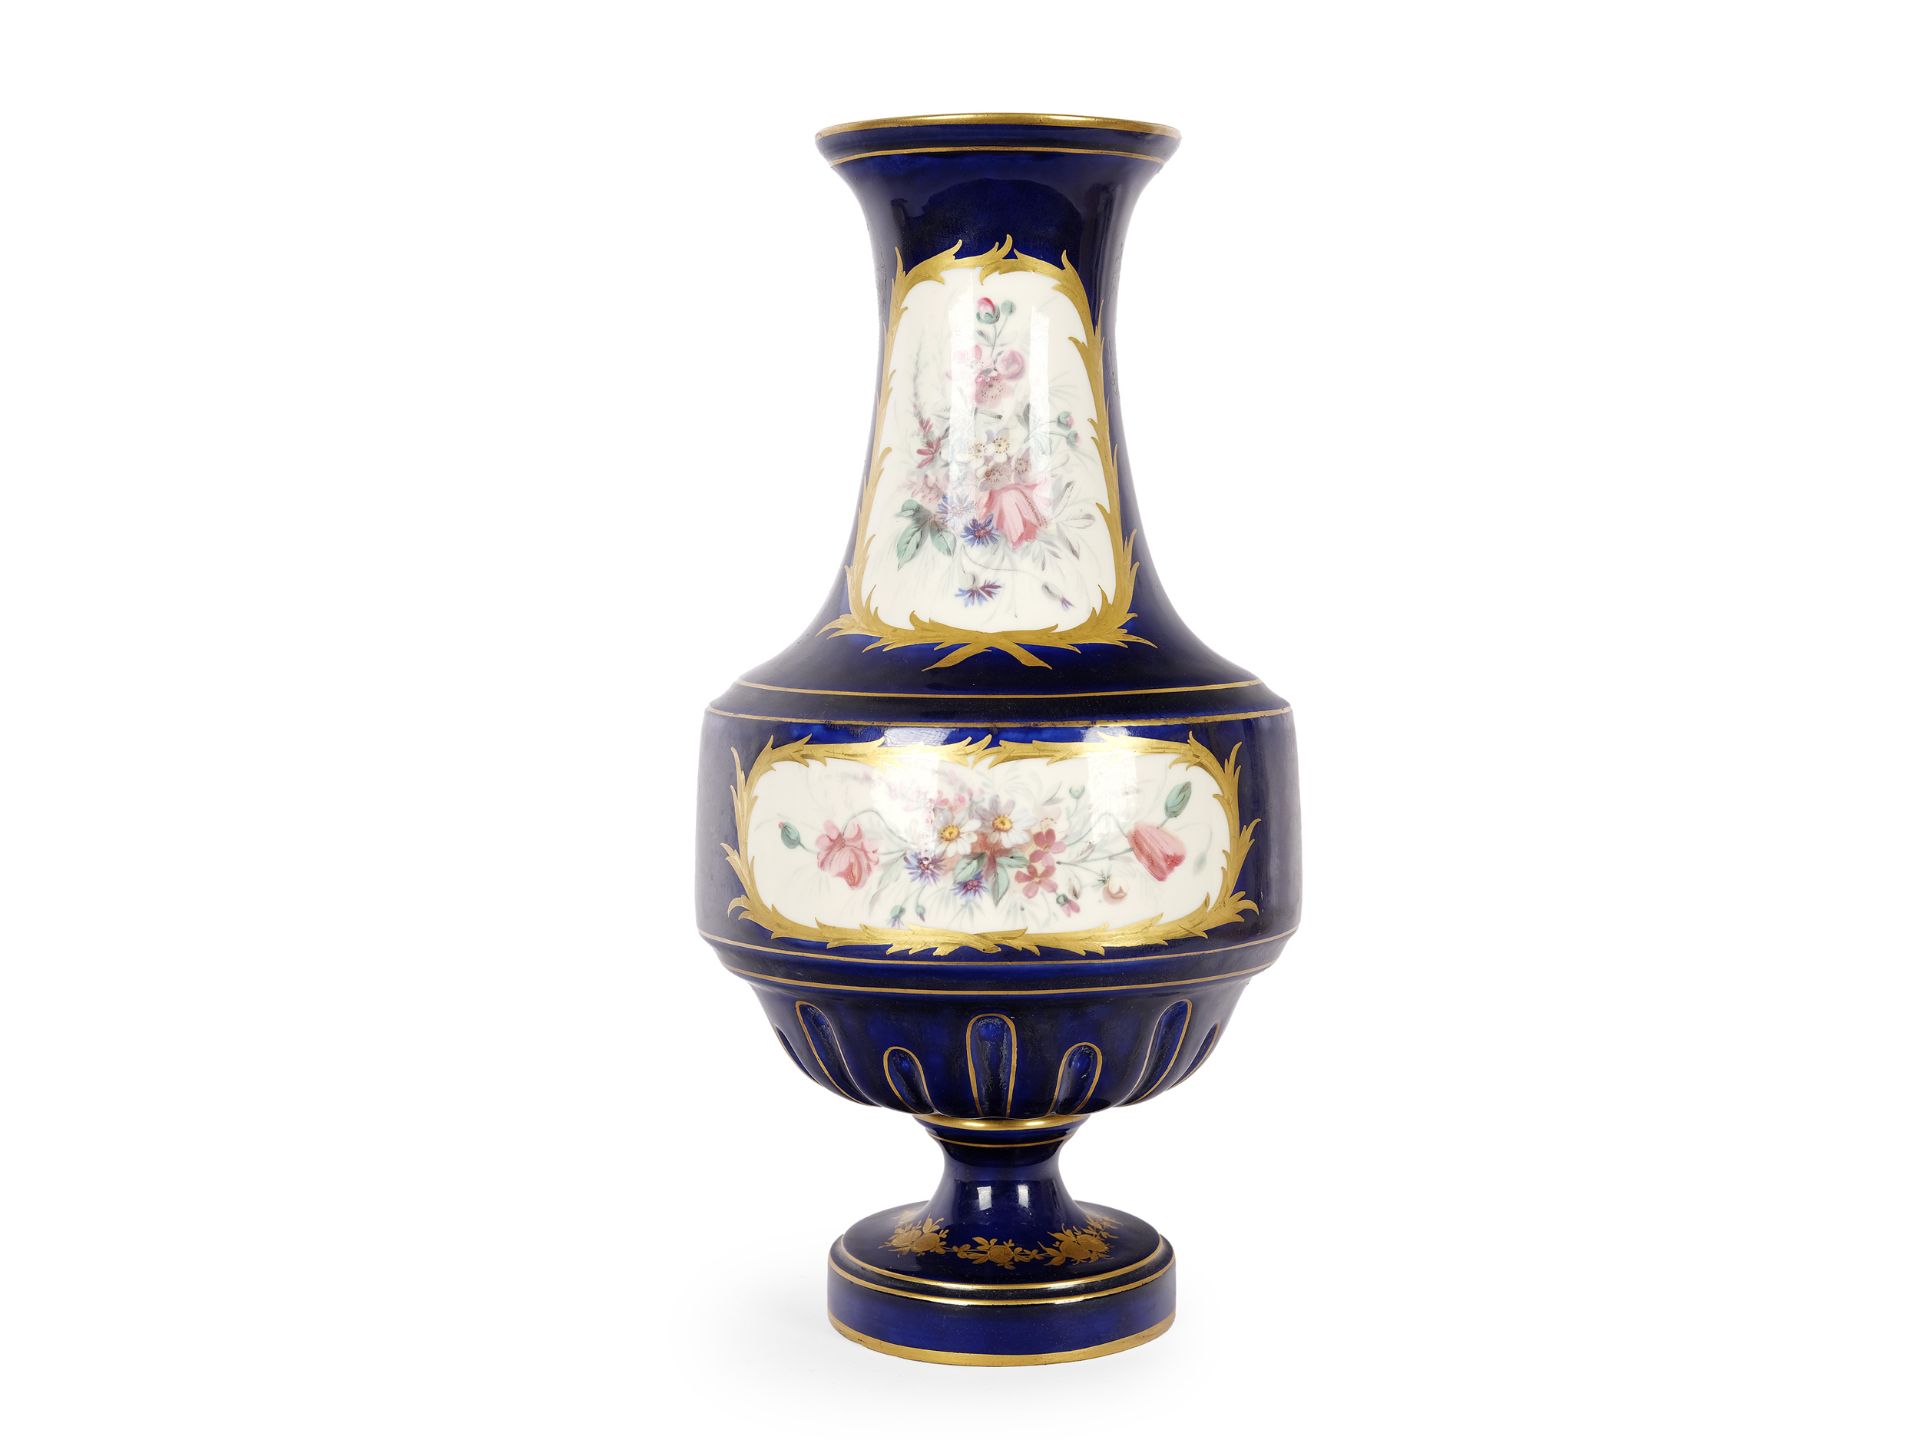 Vase with floral medallions, Sèvres - Image 2 of 4